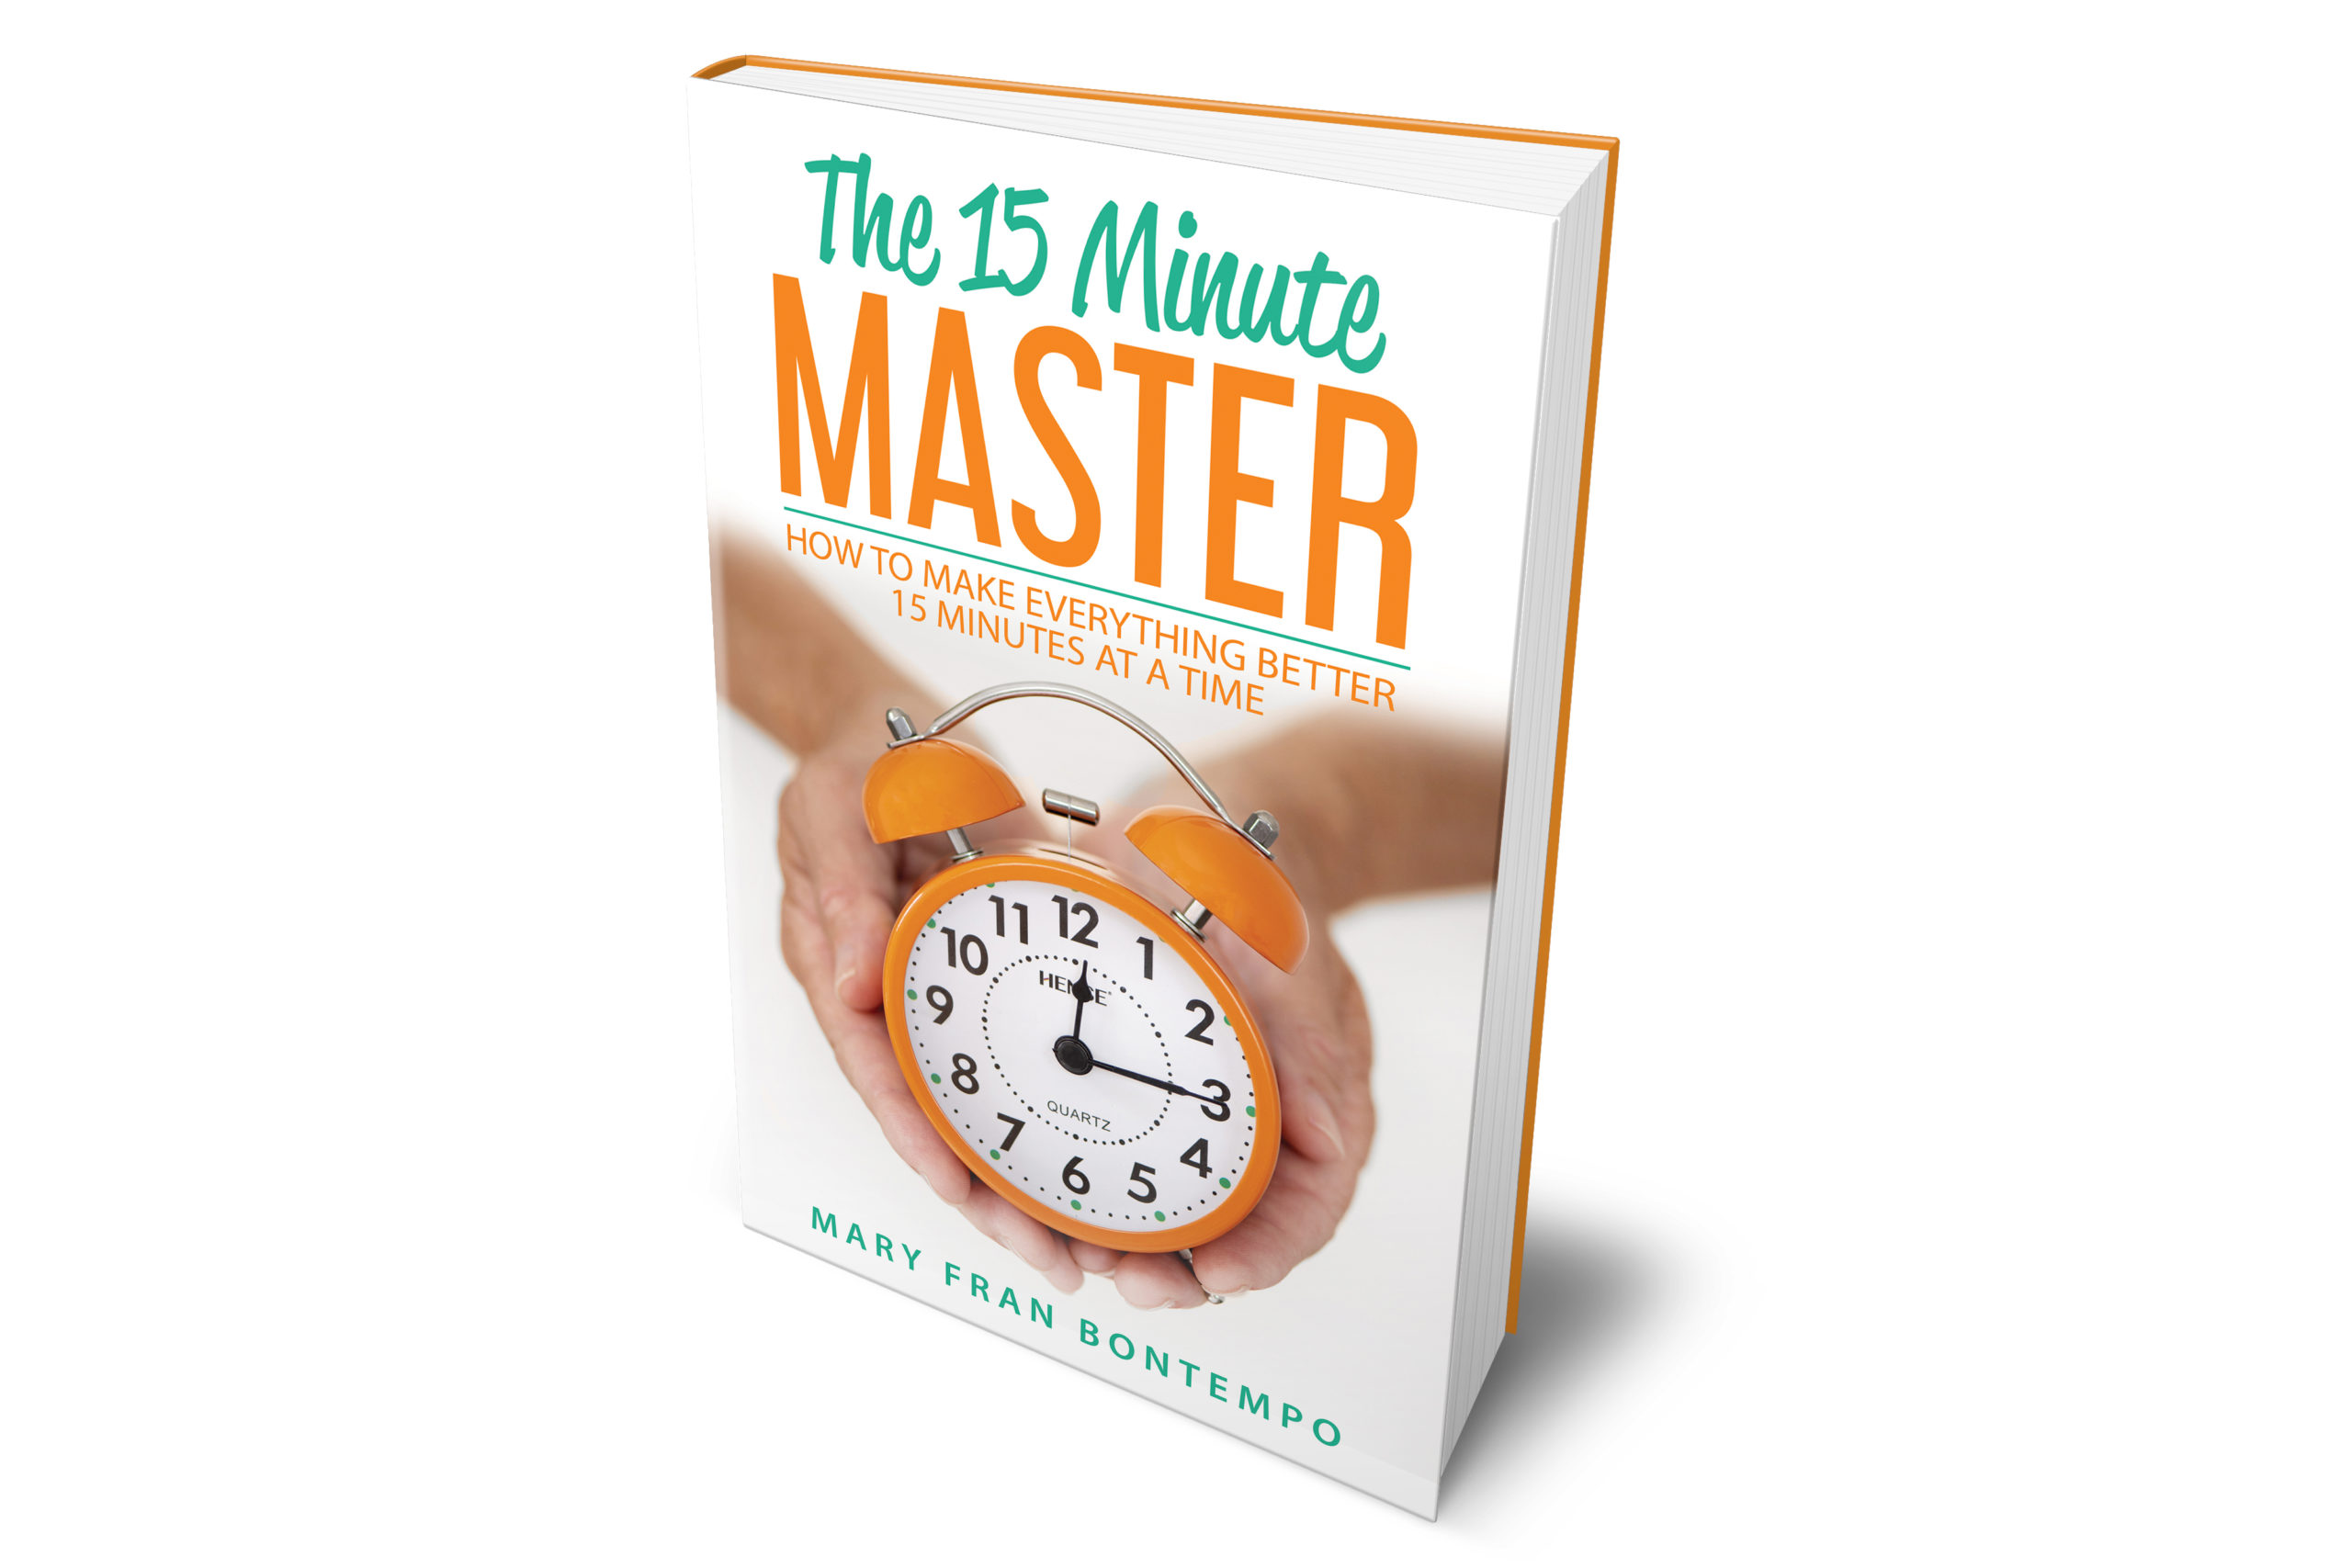 The 15 Minute Master–How to Make Everything Better 15 Minutes at a Time!